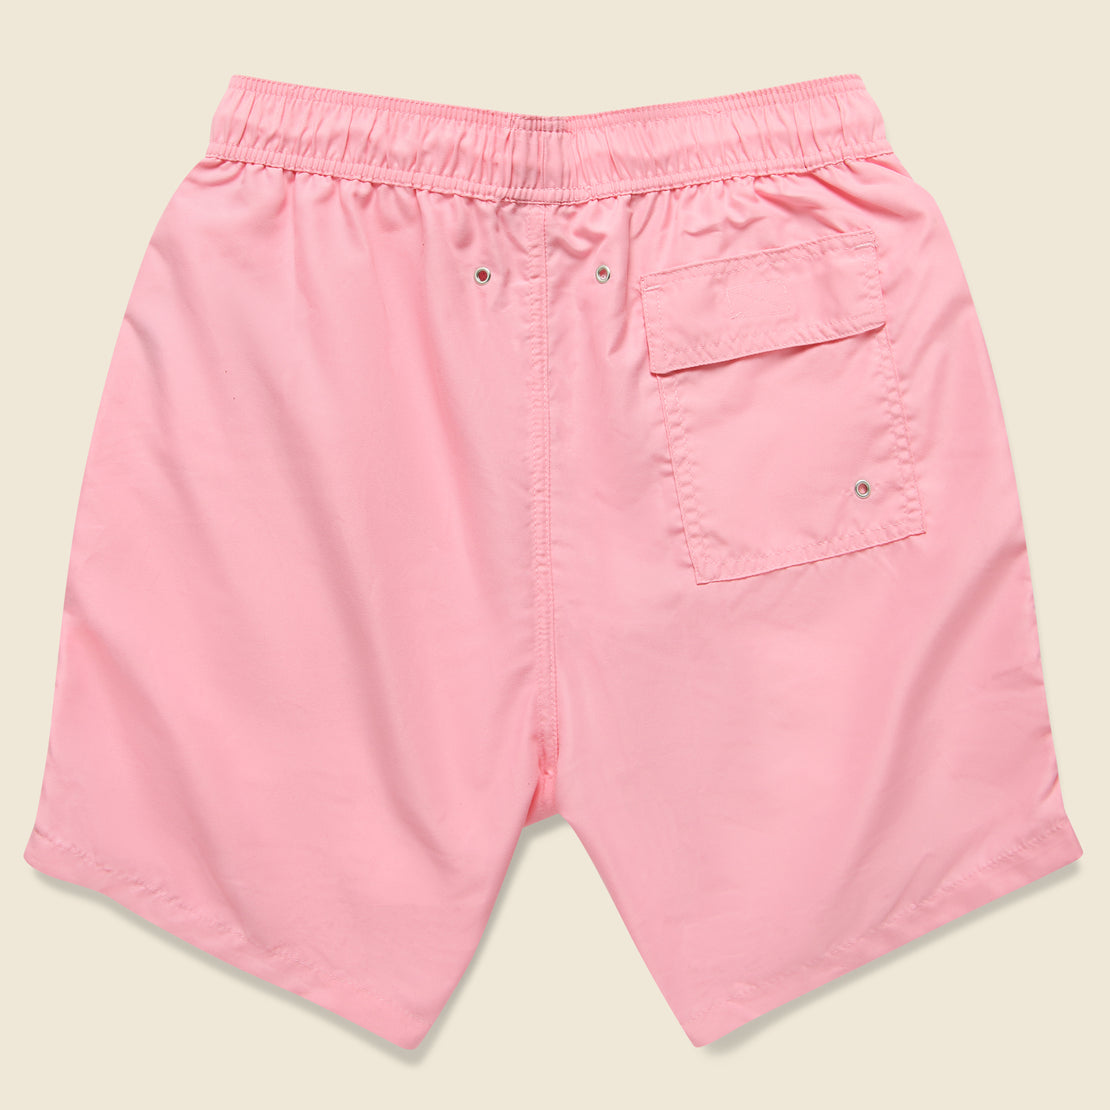 Seal Swim Trunk - Orchid - Penfield - STAG Provisions - Shorts - Swim